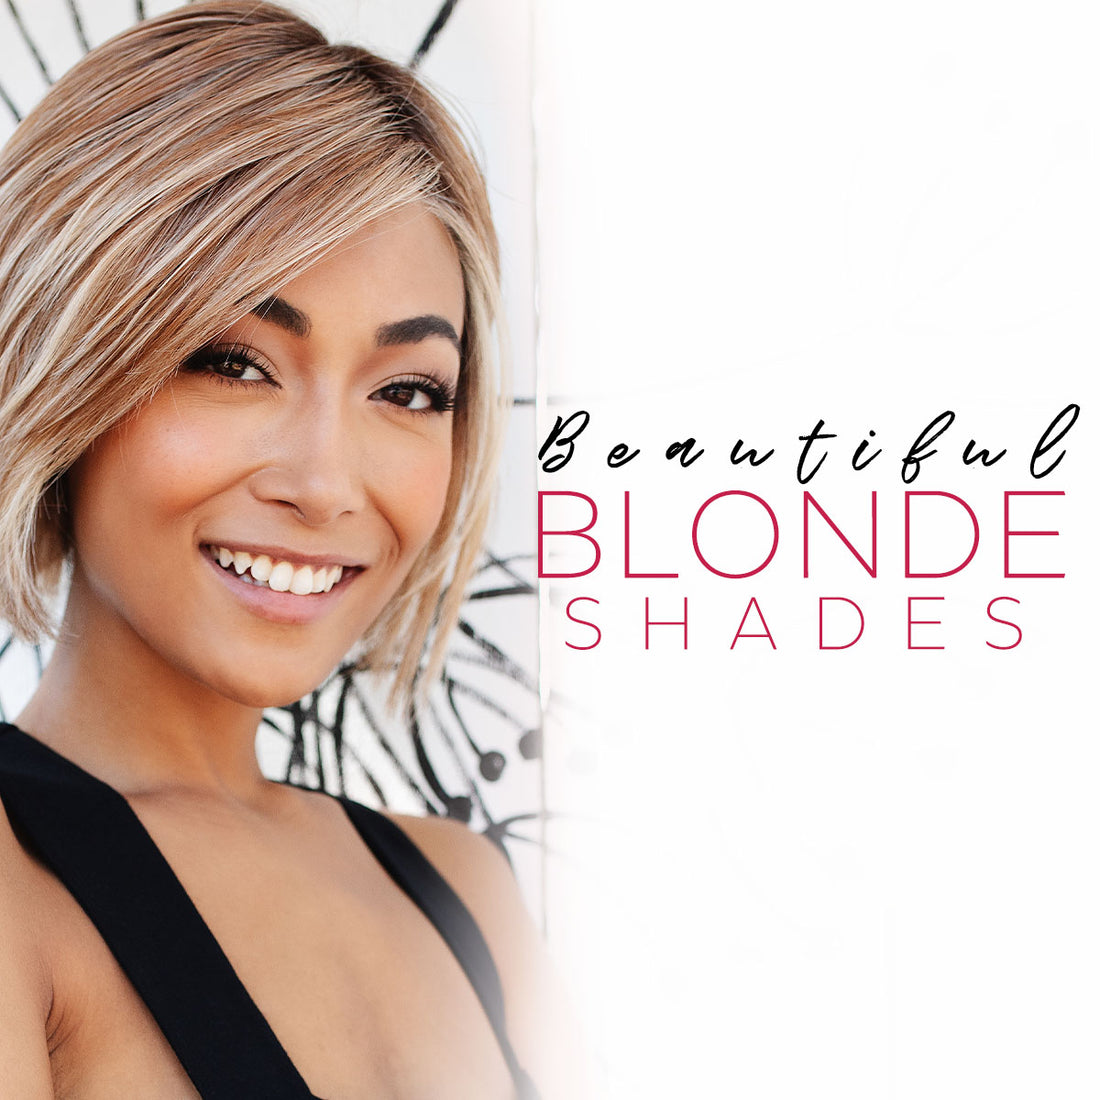 5 Flattering Blonde Shades that Look Good on Everybody